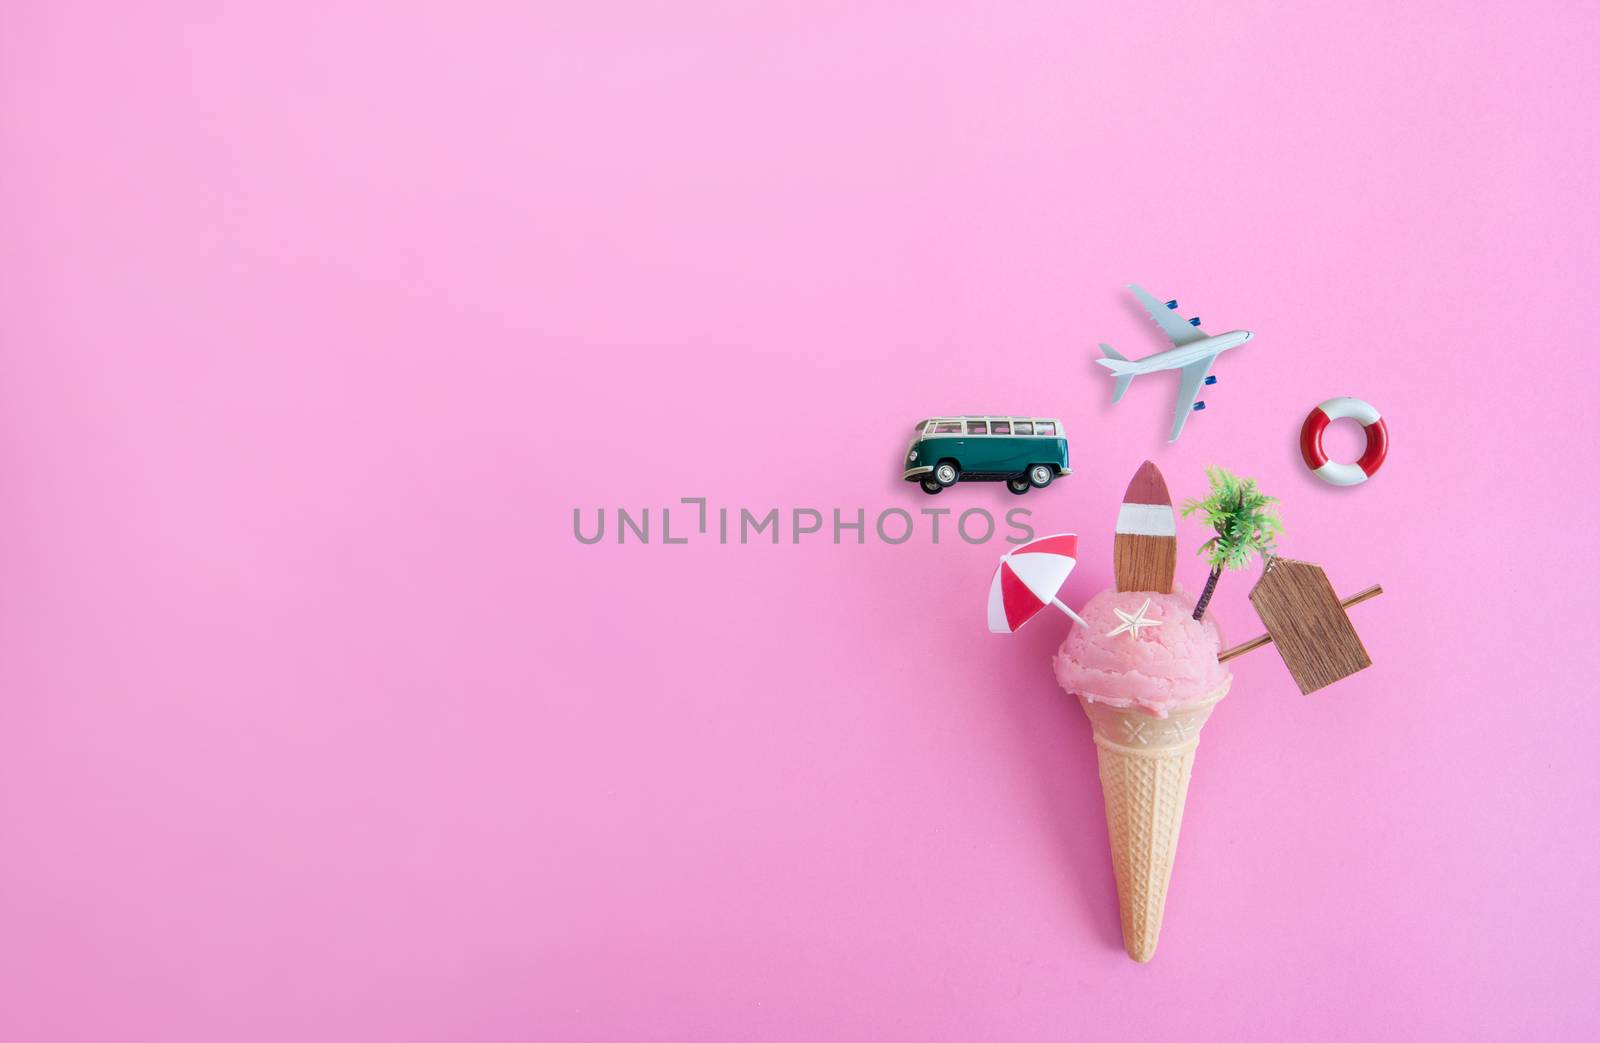 Beach sign, parasol, surfboard and pine tree inside an icecream cone surrounded by summer objects